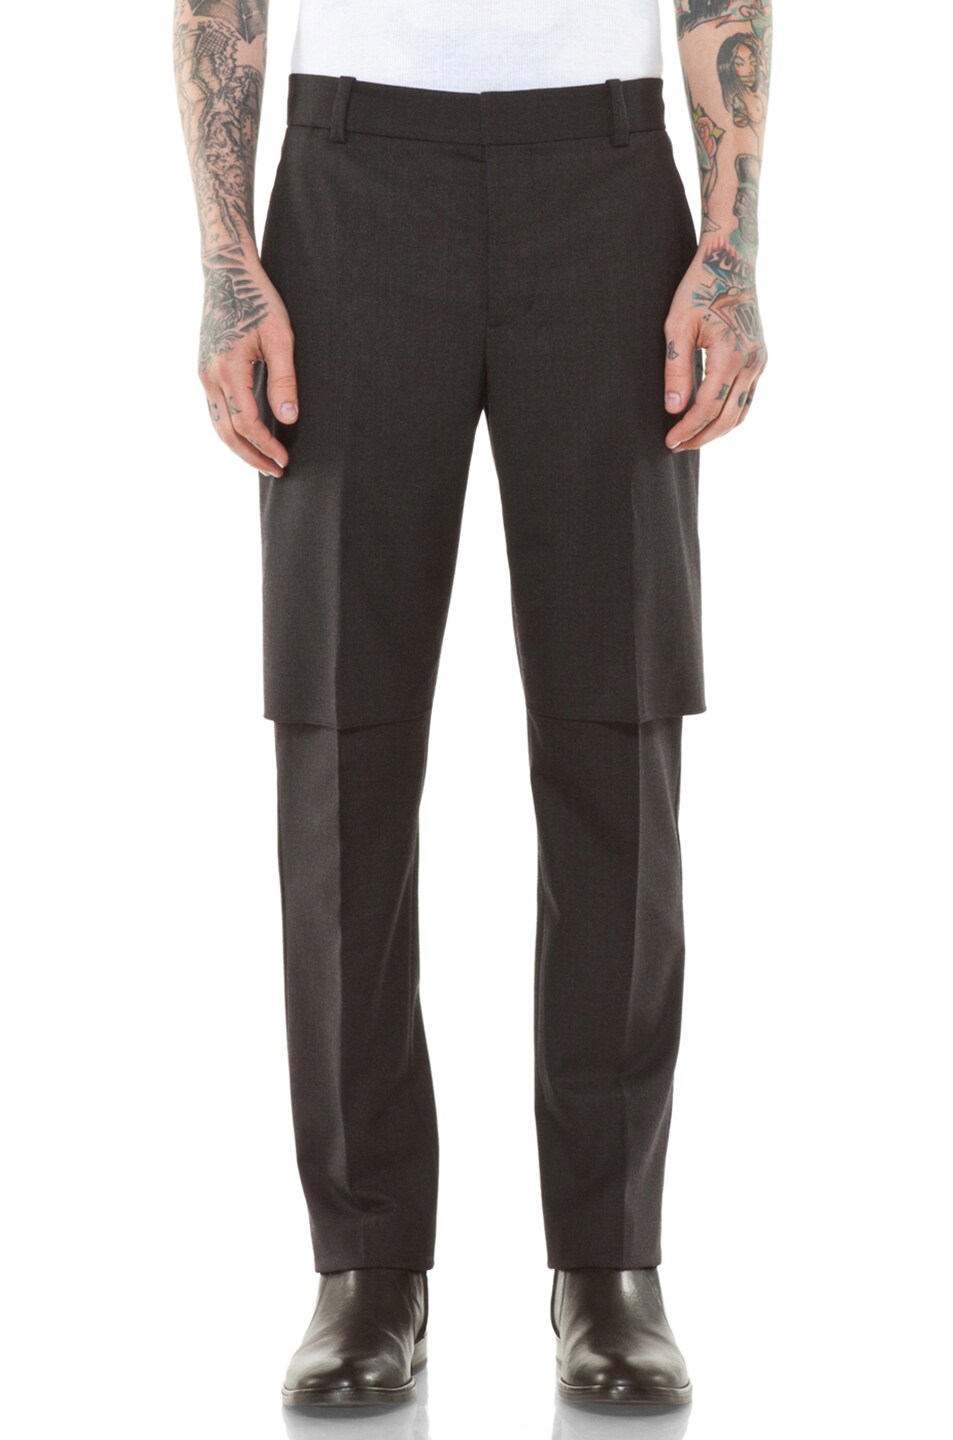 Image 1 of 3.1 phillip lim Tromp Tapered Pant in Charcoal